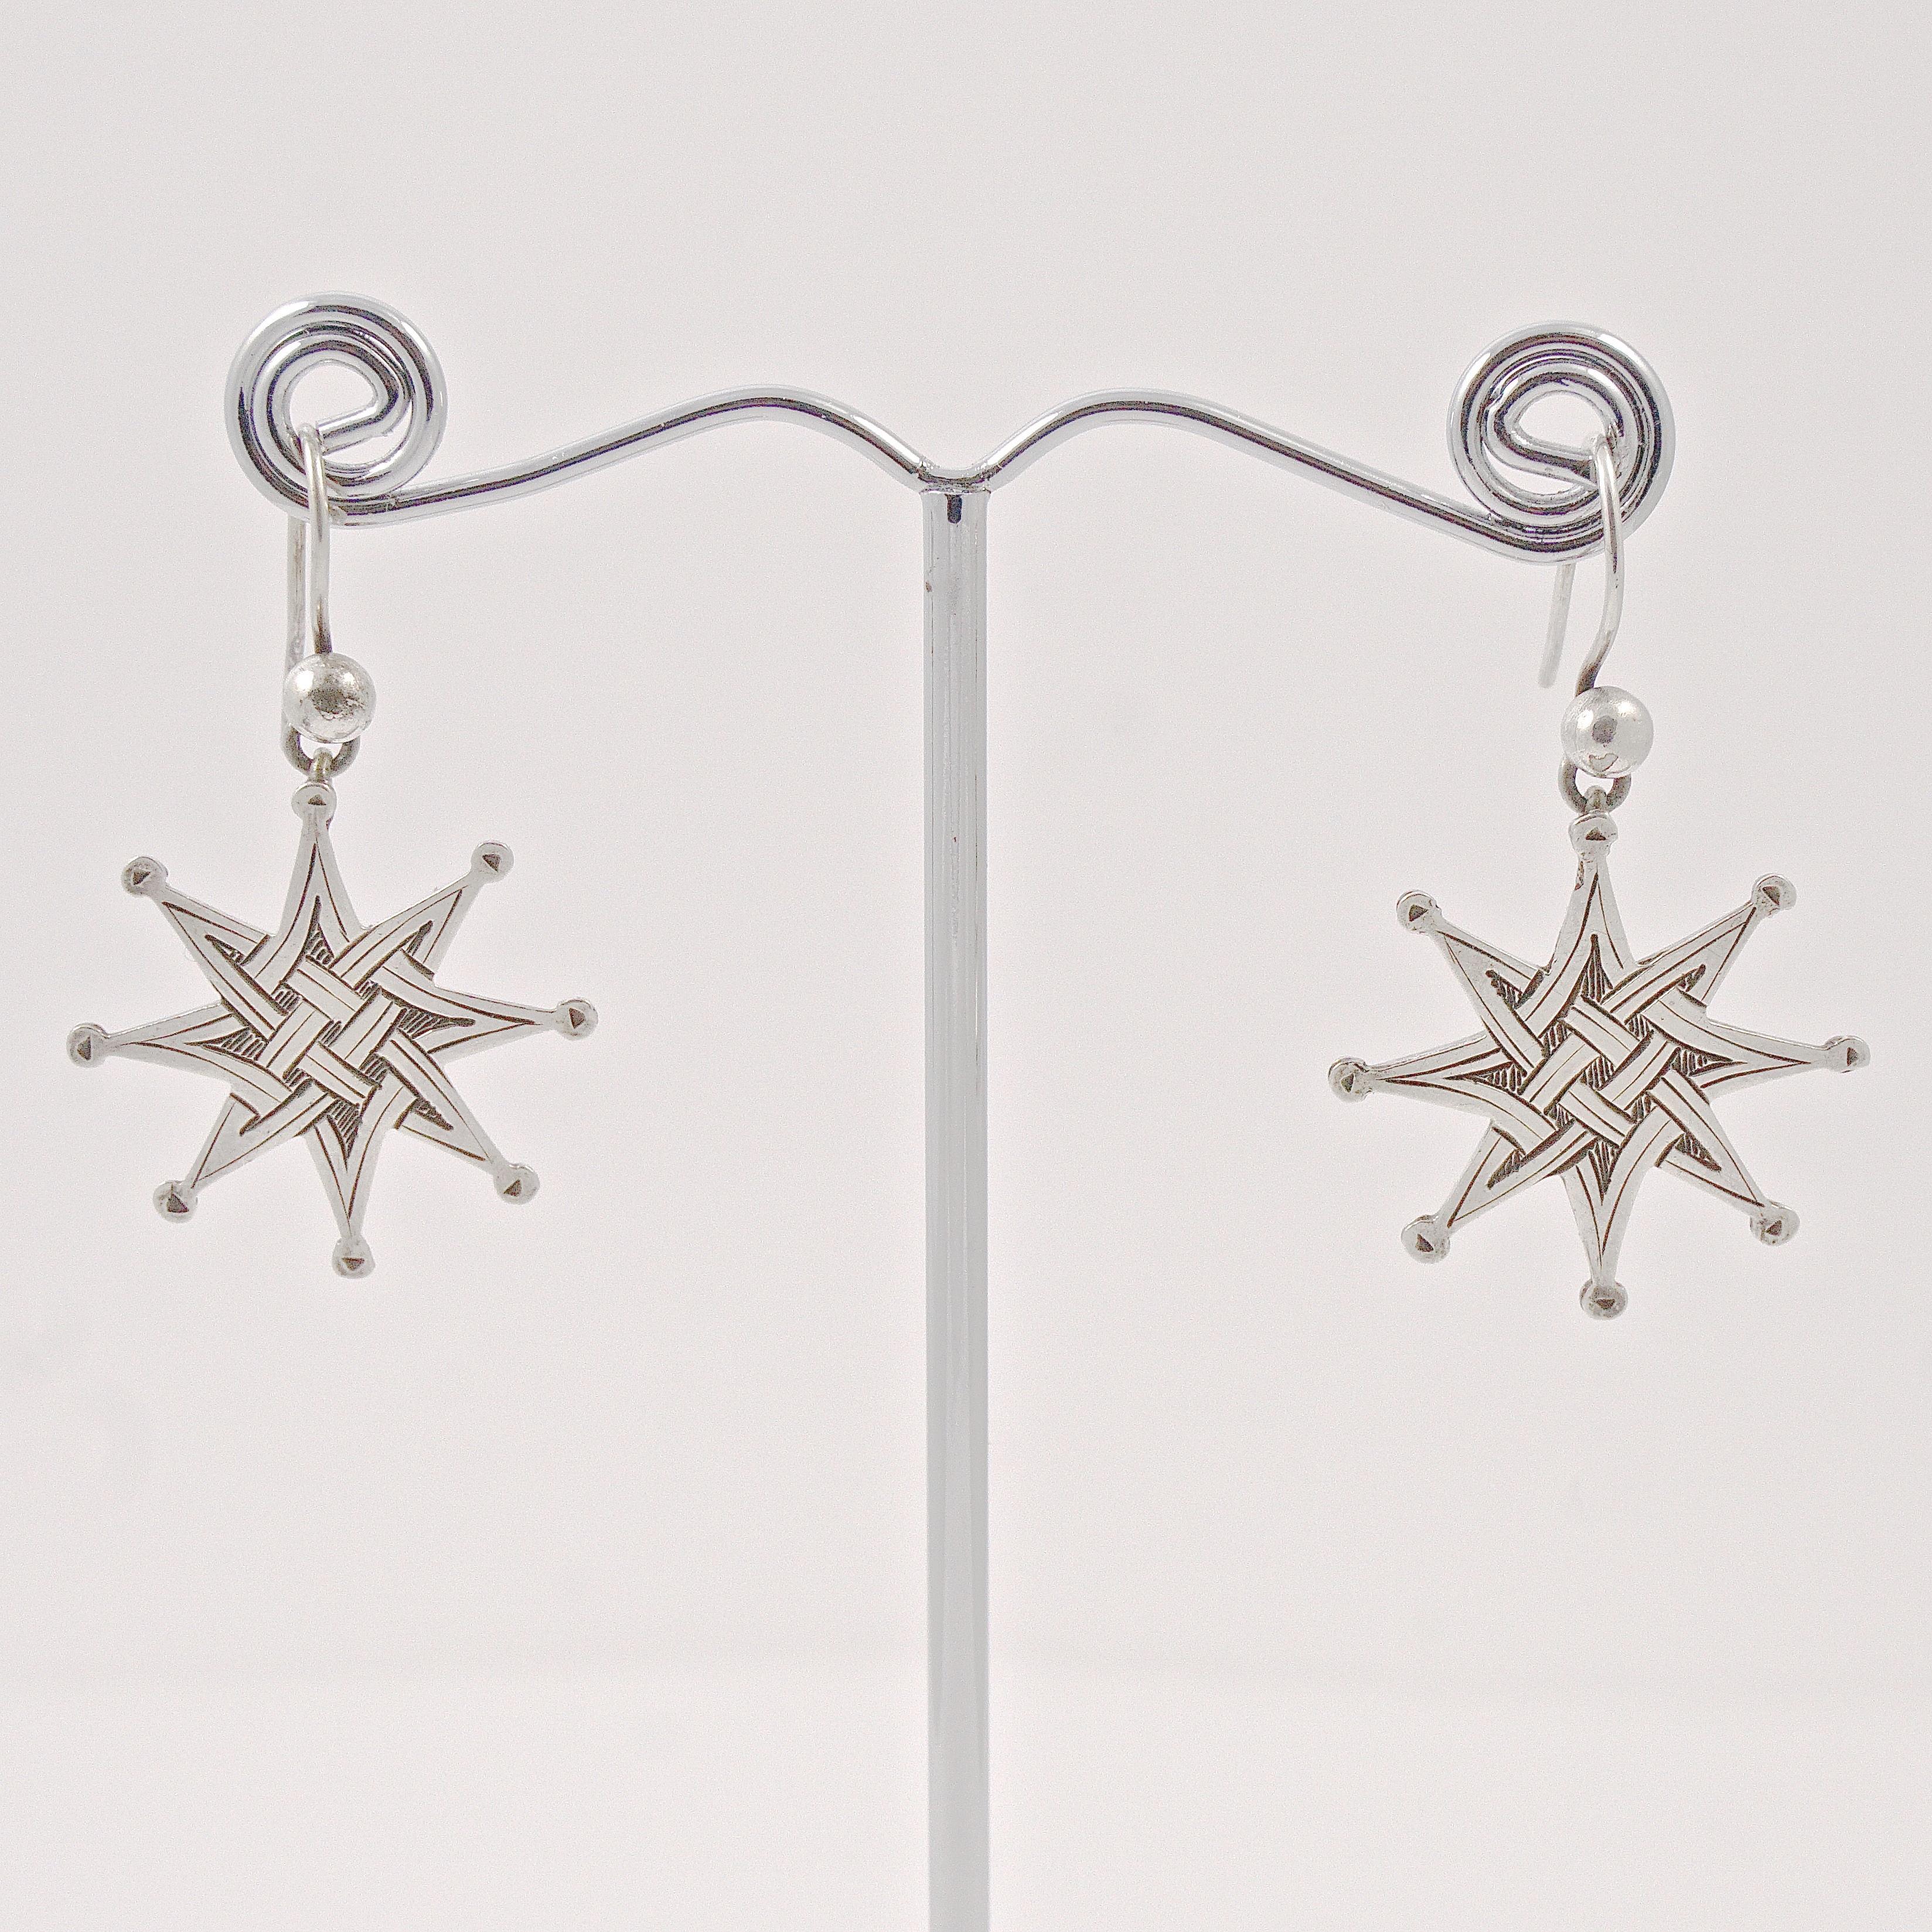 Beautiful antique silver star drop earrings, featuring a lovely hand engraved Celtic design. Measuring diameter 2.25cm / .88 inch, they are unmarked but test for silver. The earrings are in very good condition, with scratching as expected, and some